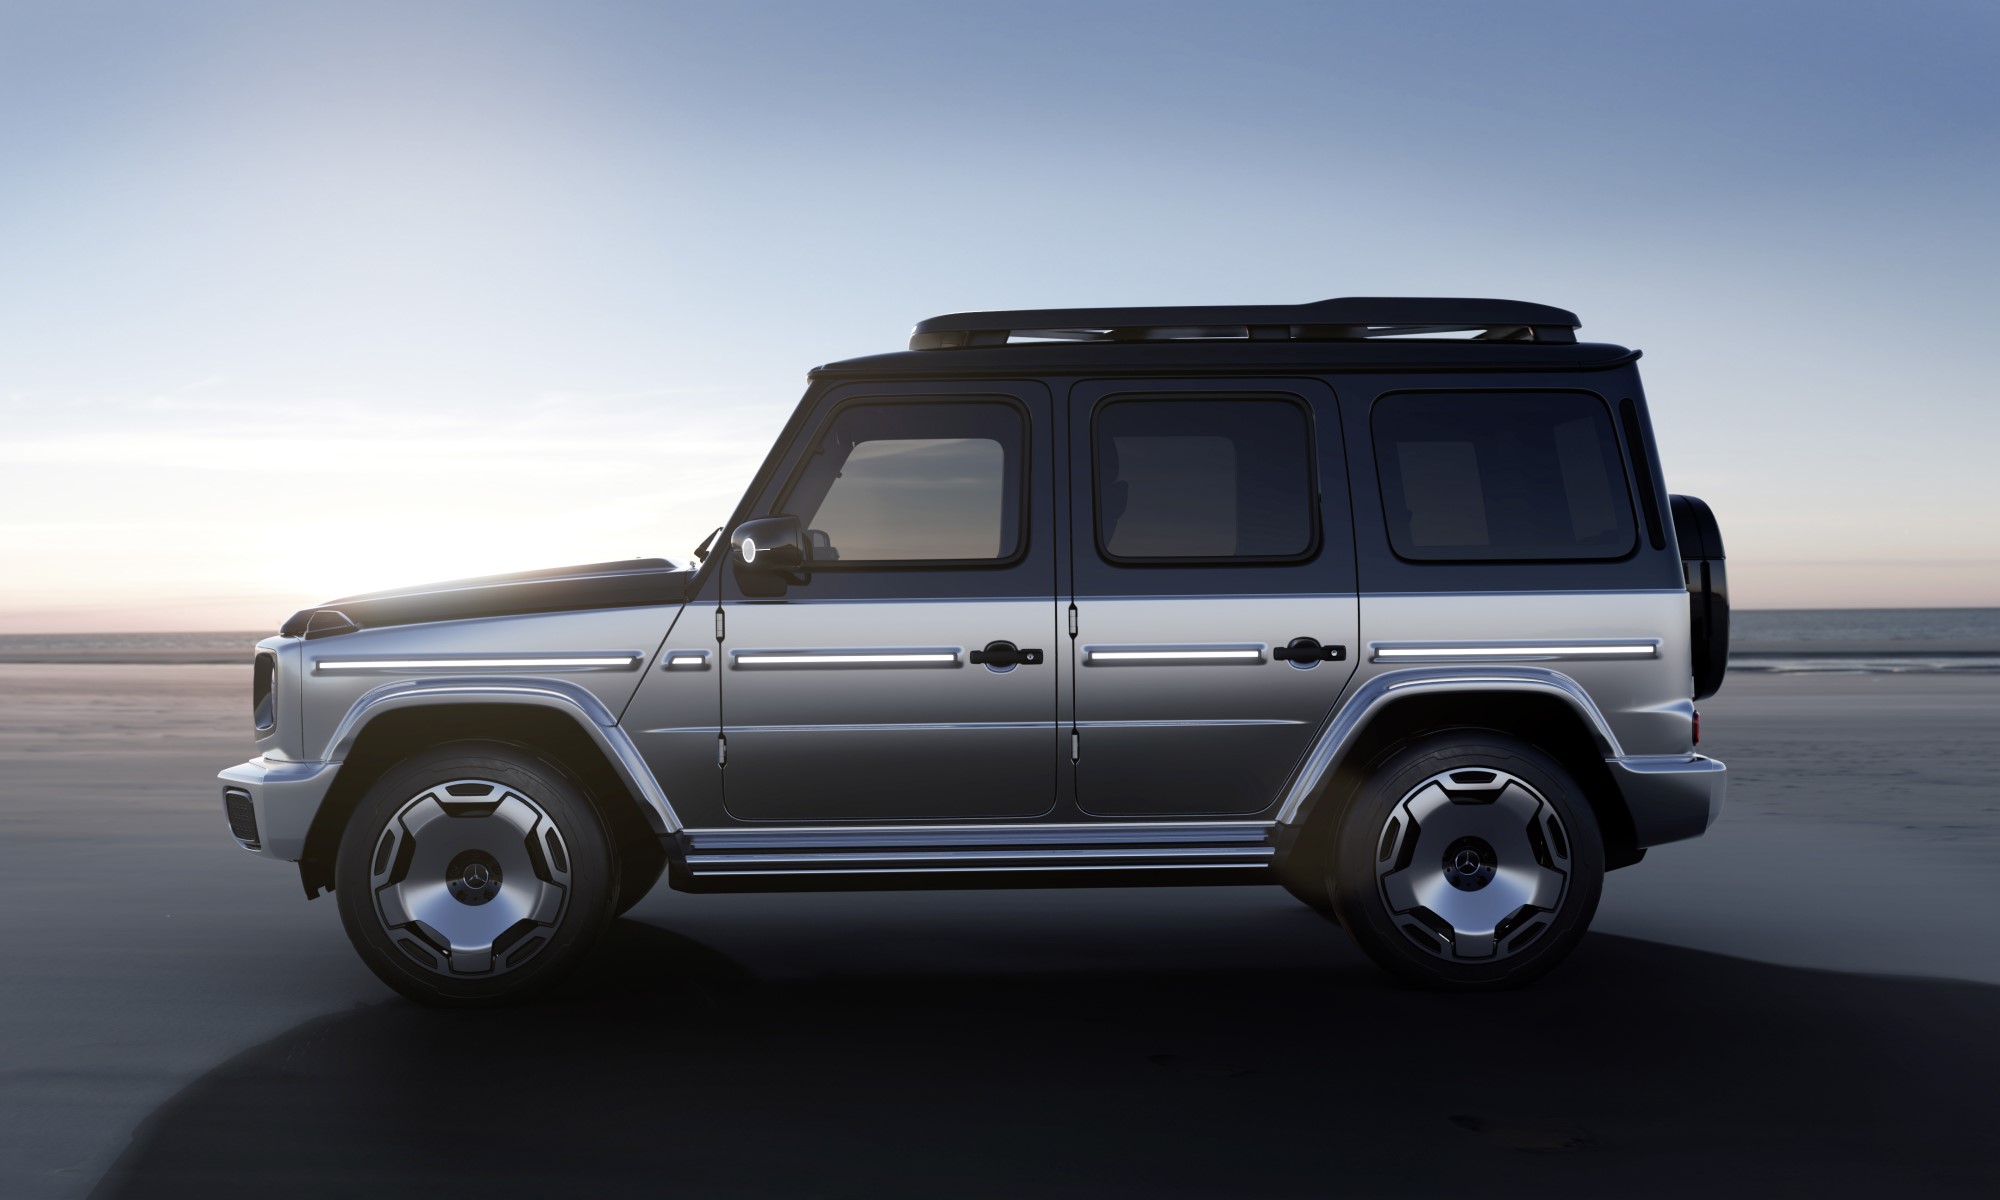 G-Class Goes Electric